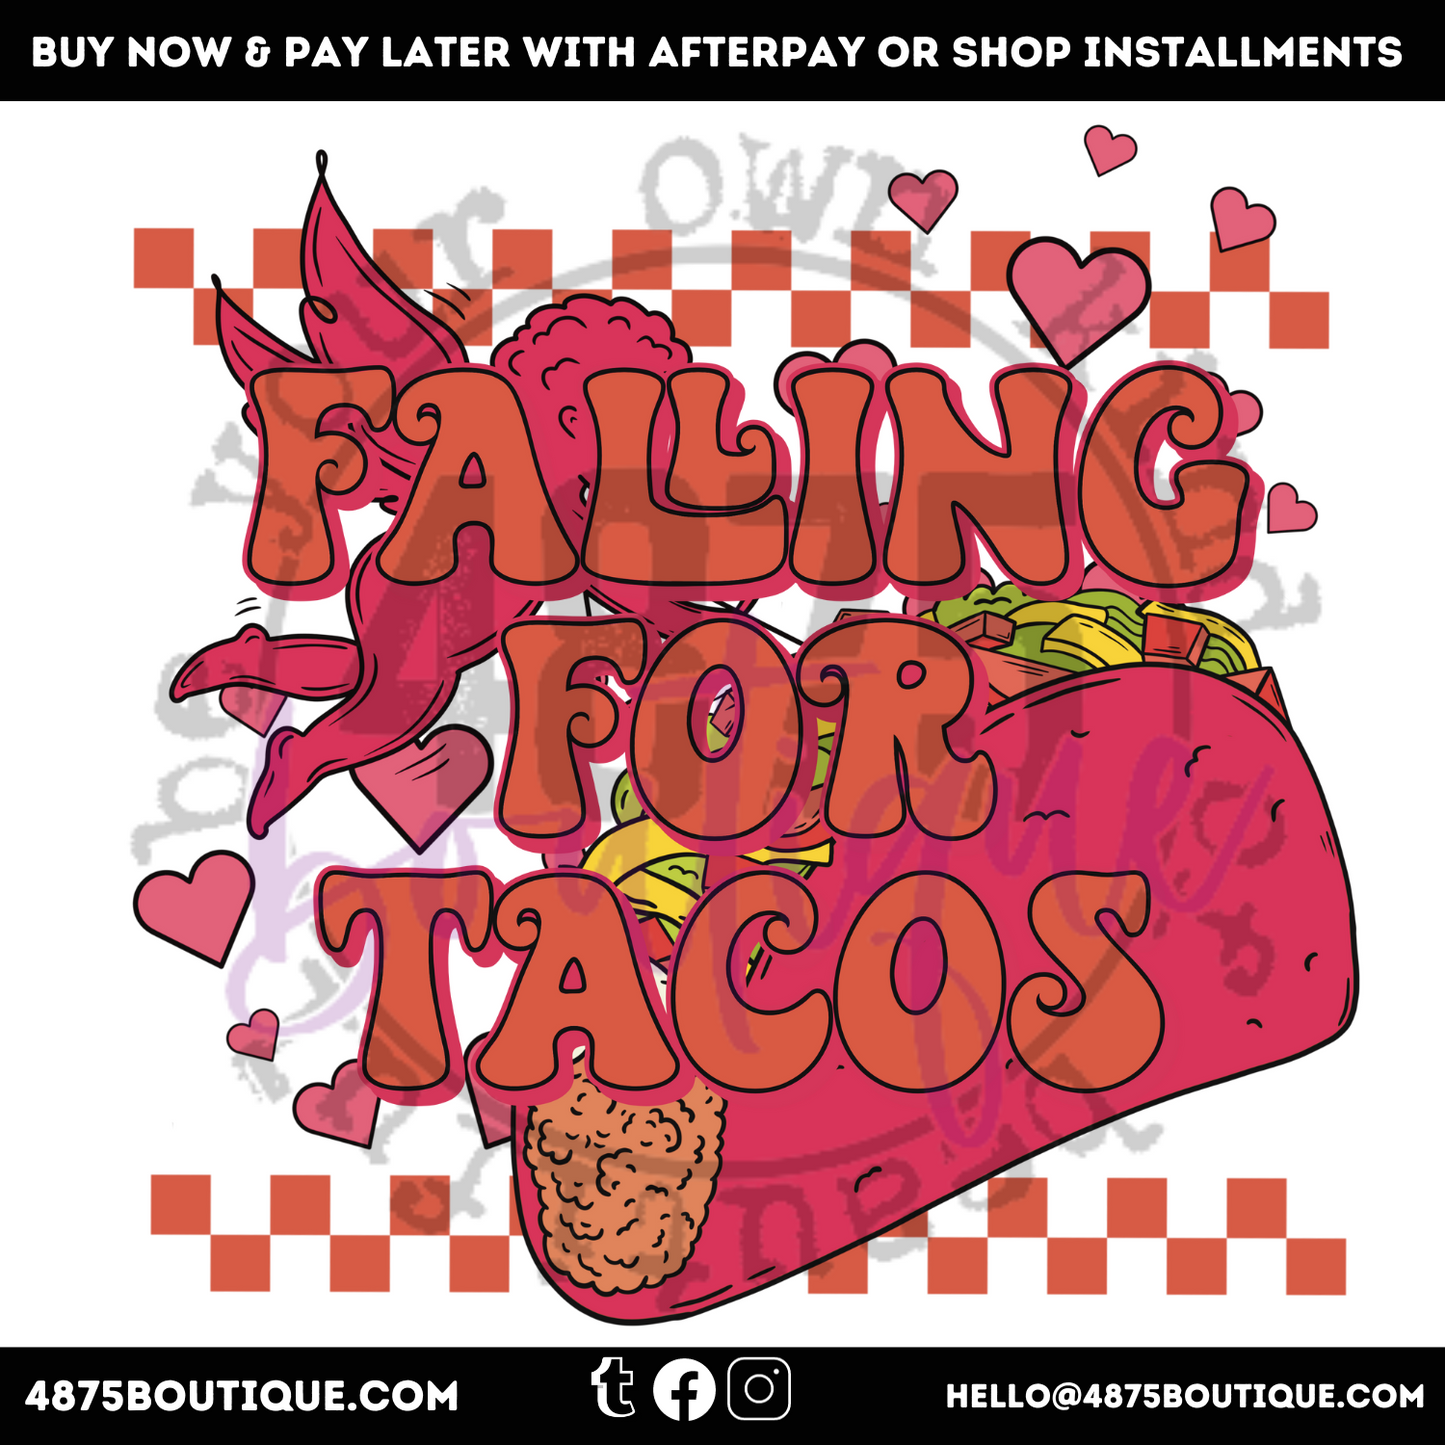 Falling For Tacos